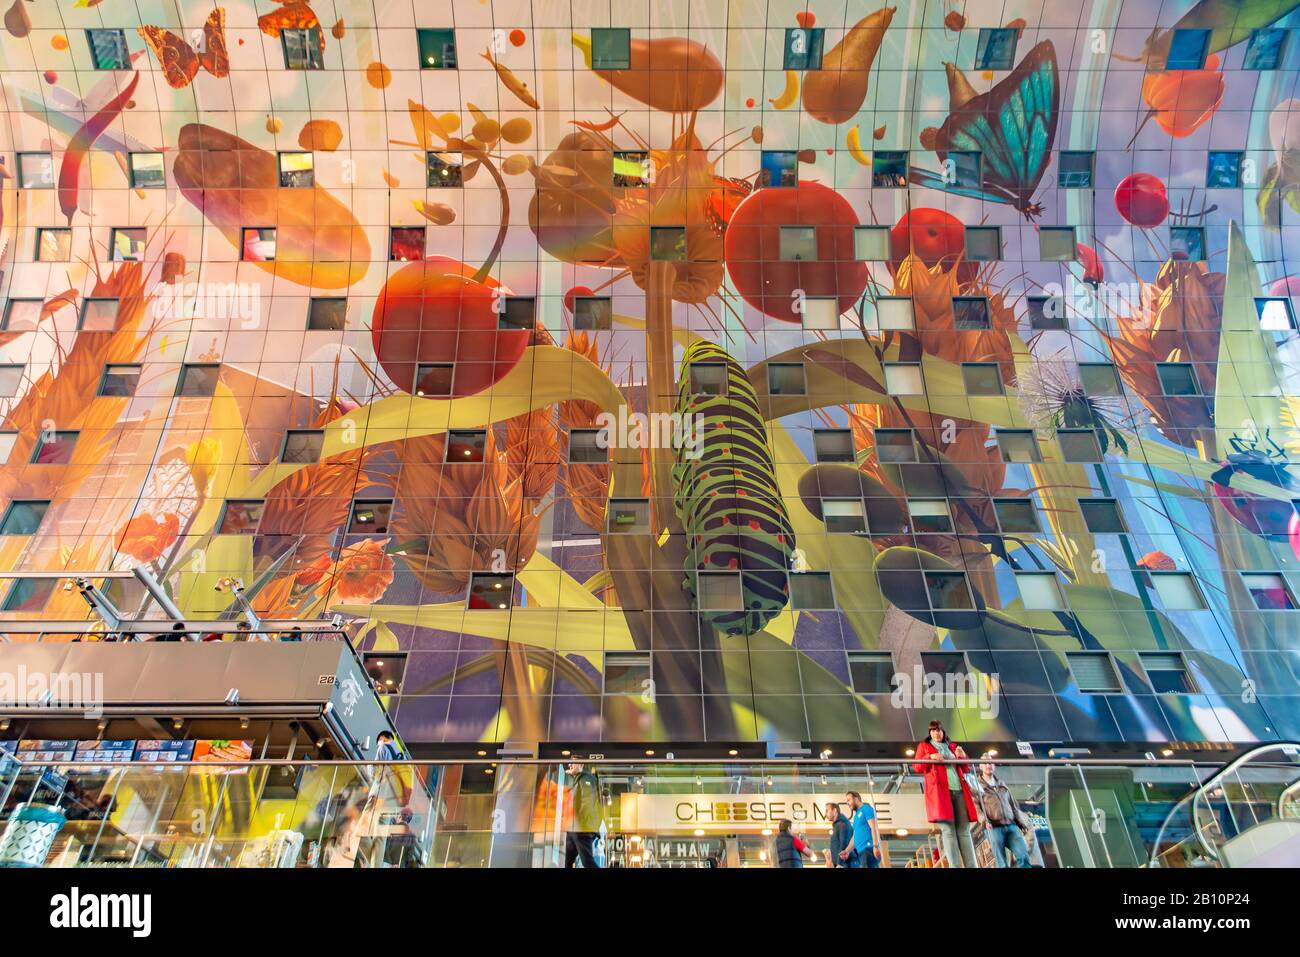 The colorful painting on the wall of Market Hall in Rotterdam, Netherlands Stock Photo